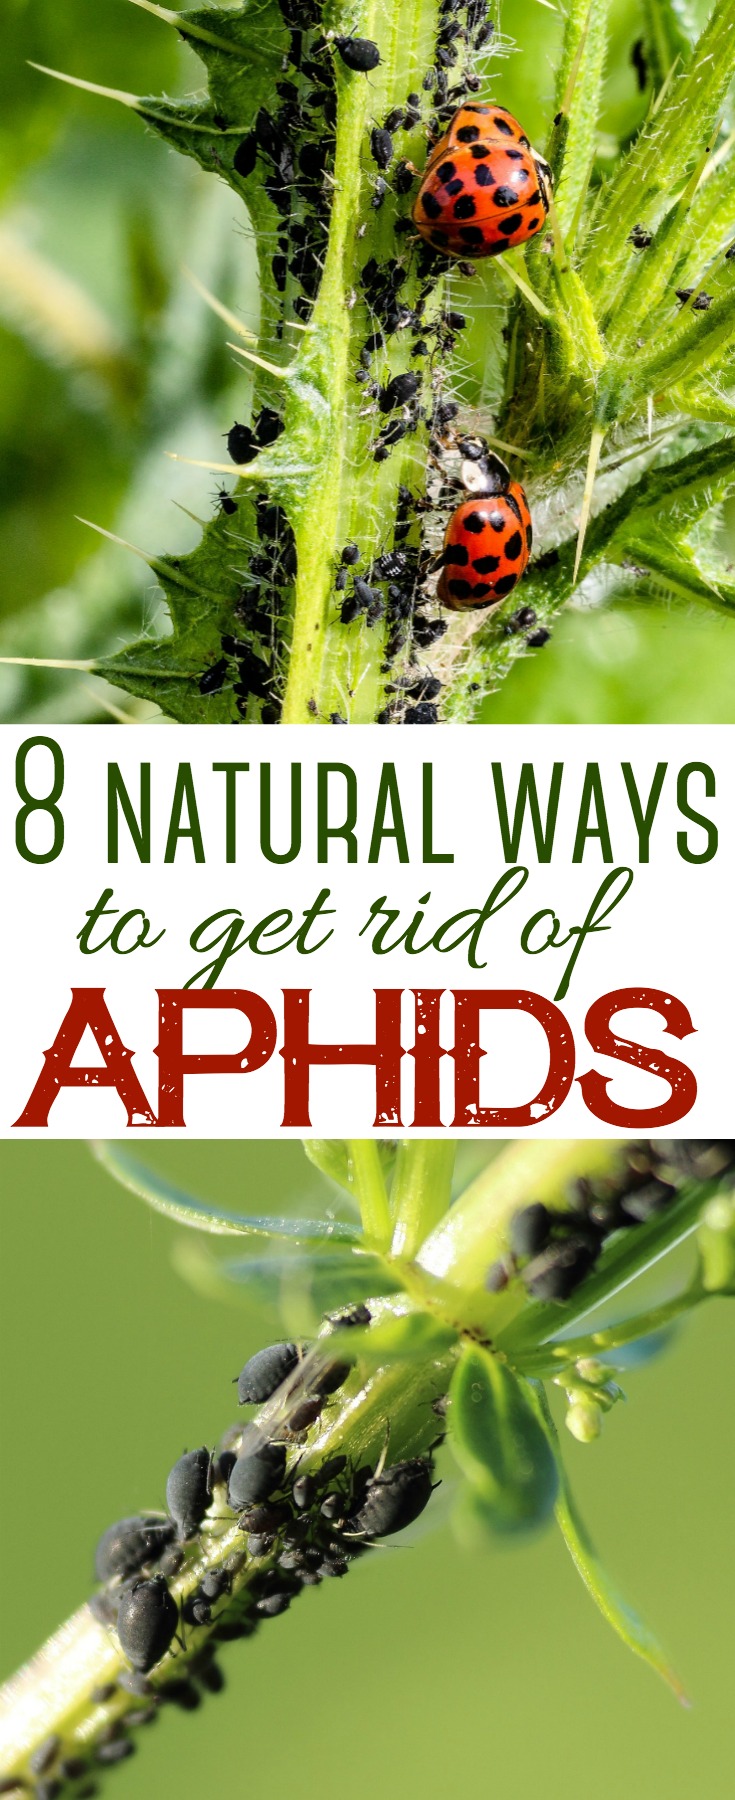 Aphids can cause serious havoc and destruction in any garden. Here are 8 natural ways to get rid of aphids in your garden. 